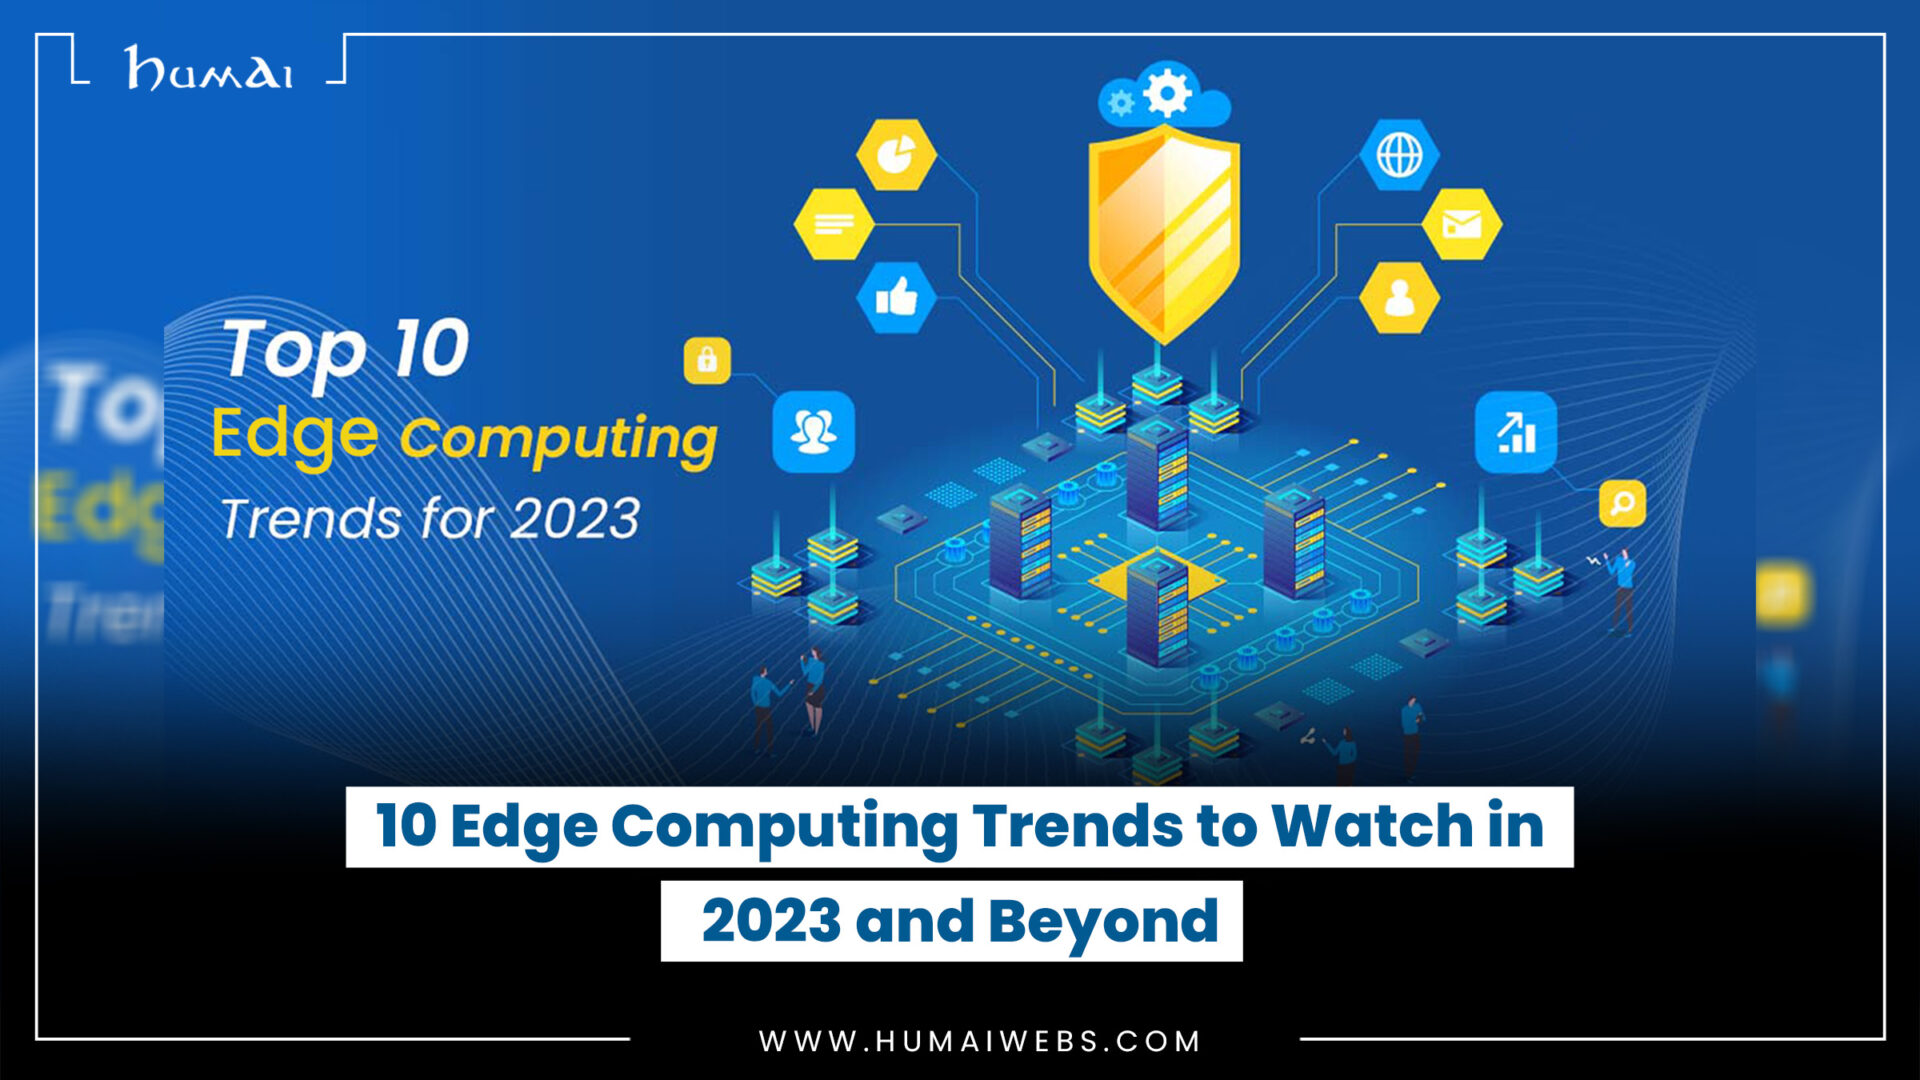 10 Edge Computing Trends to Watch in 2023 and Beyond